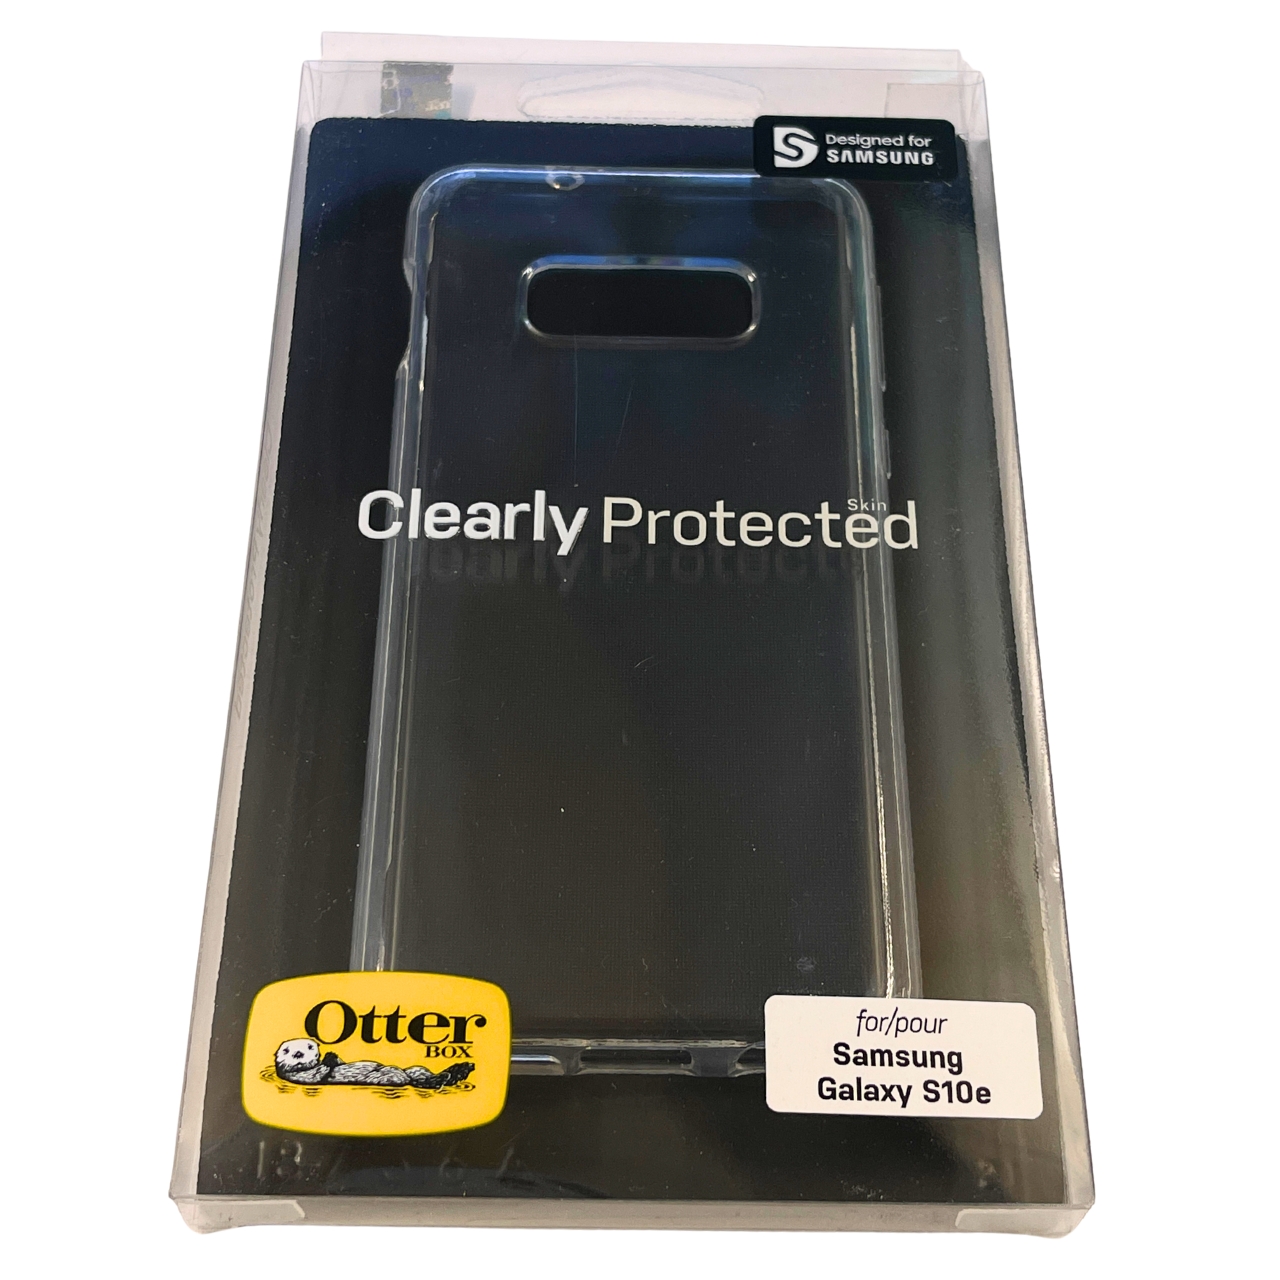 Otterbox - Samsung Galaxy S10e Schutzhülle - Clearly Protected